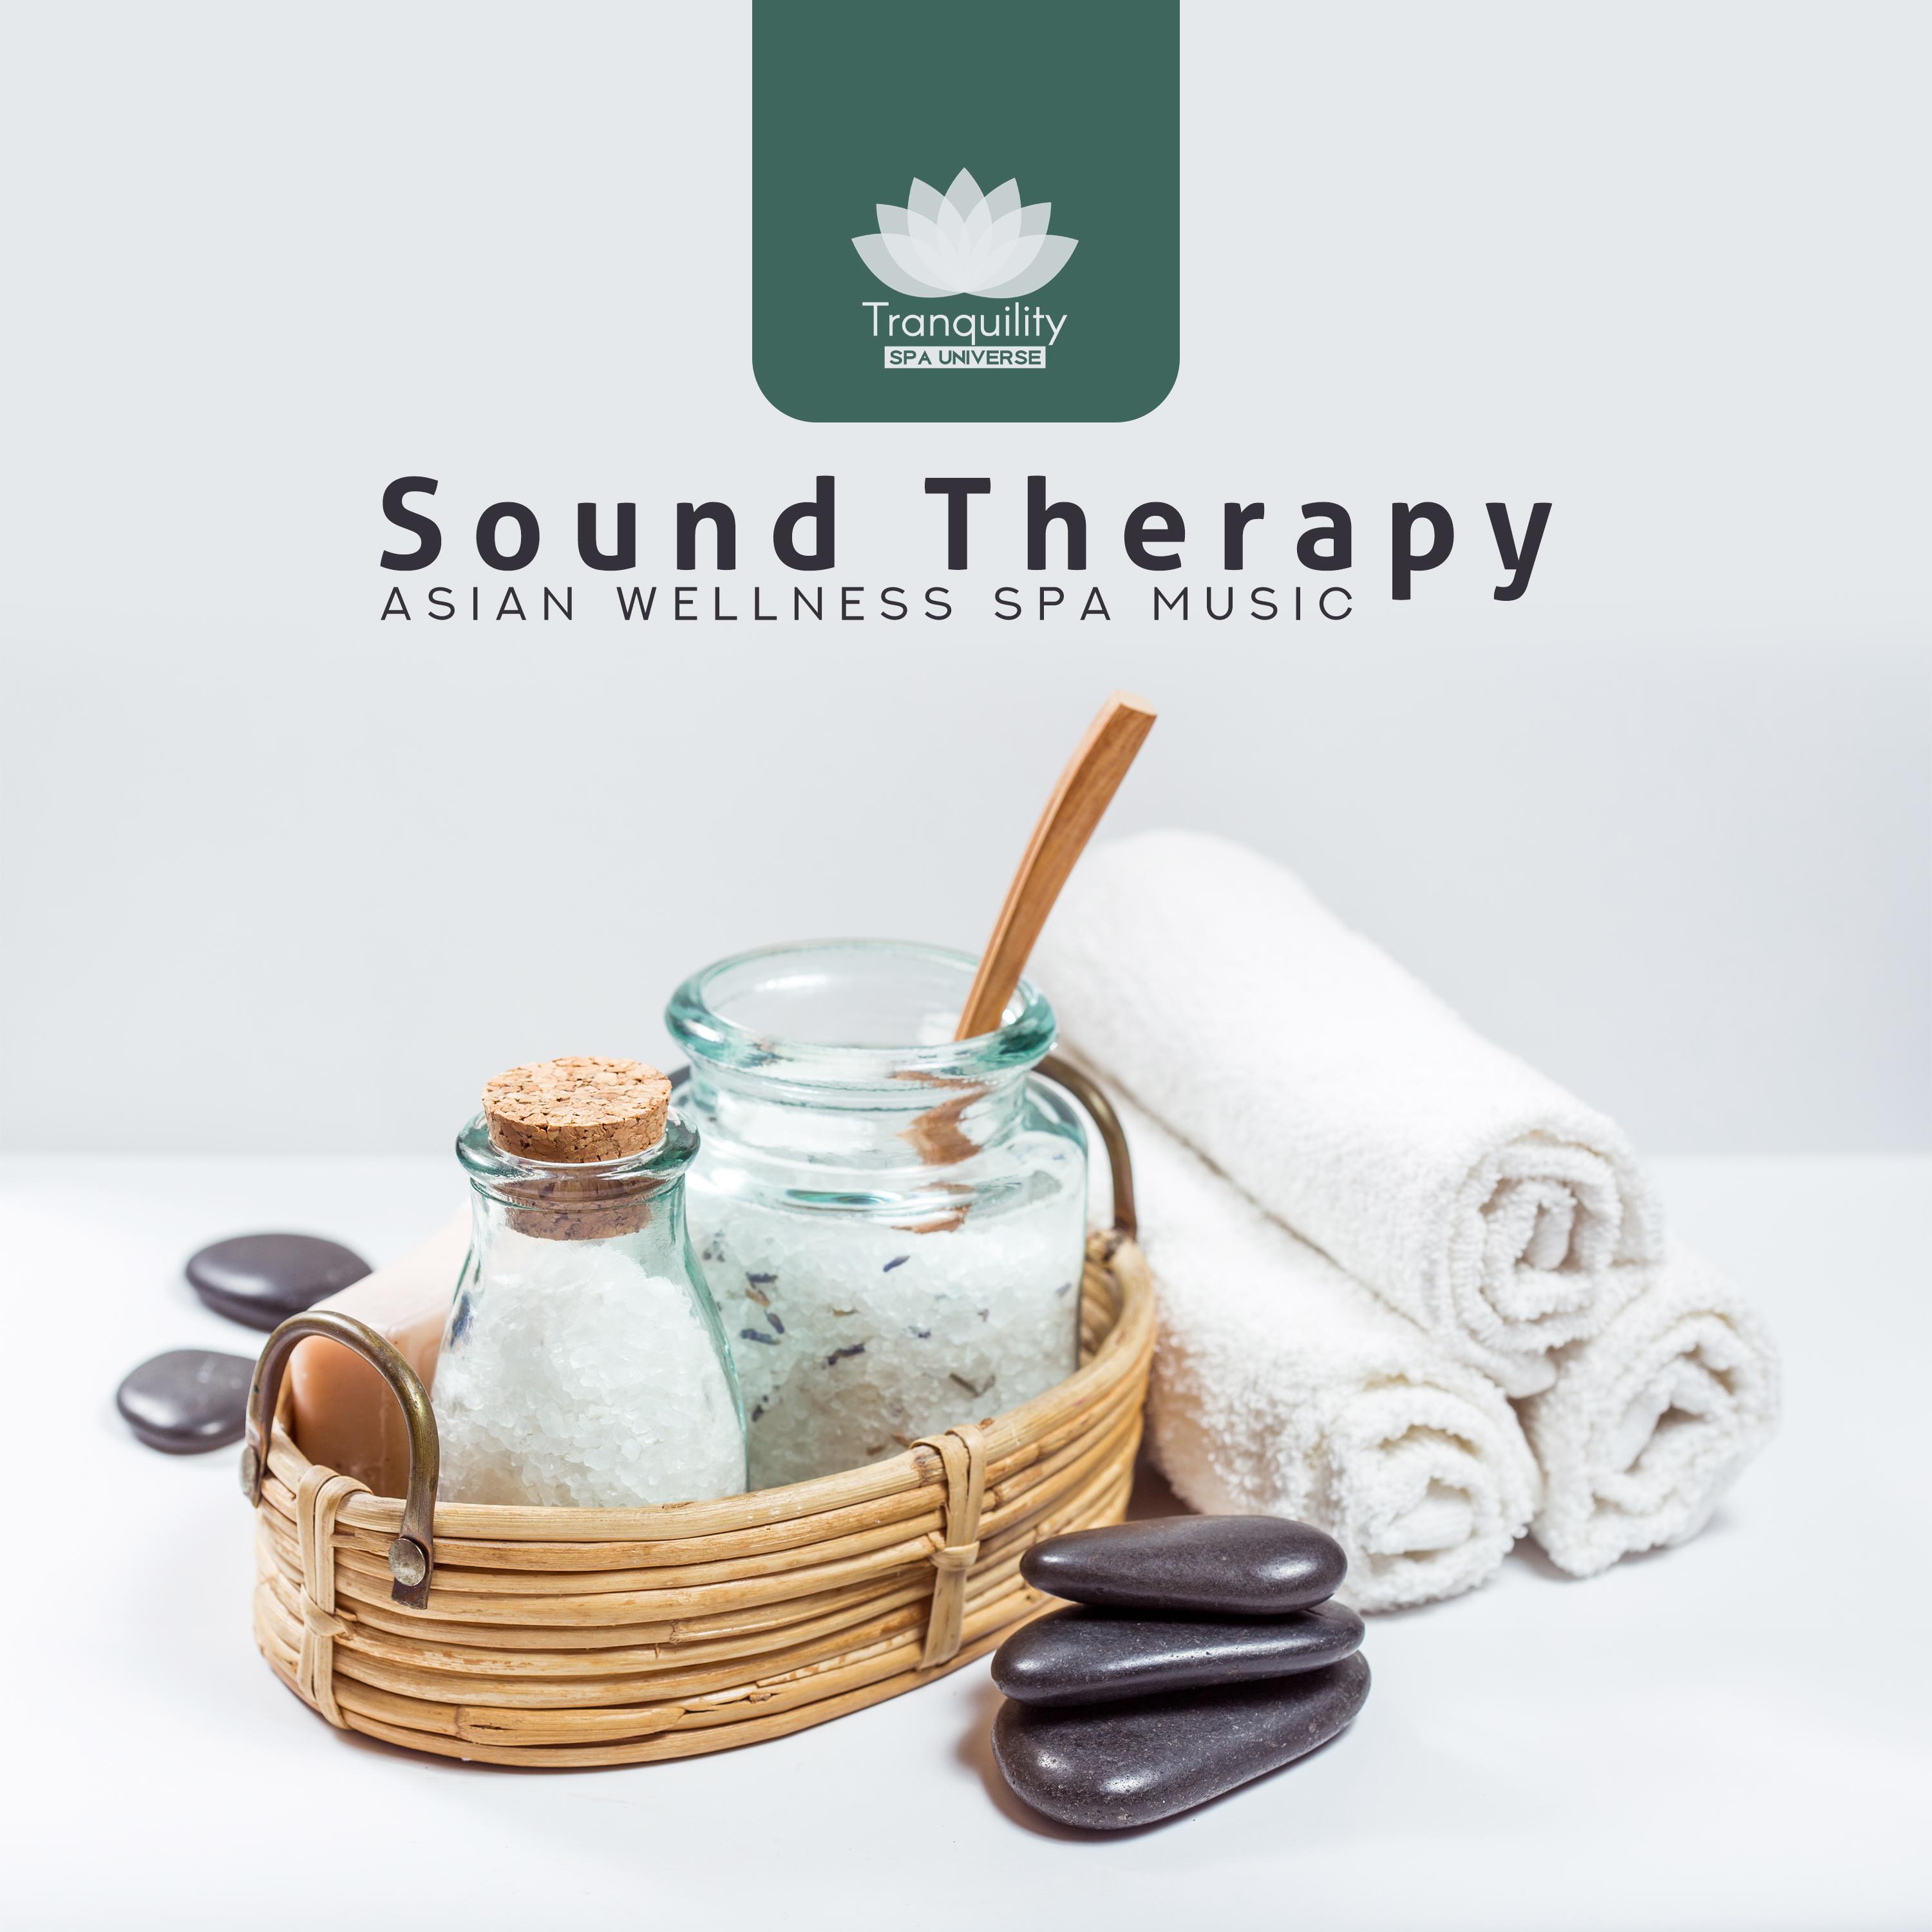 Sound Therapy (Asian Wellness Spa Music)